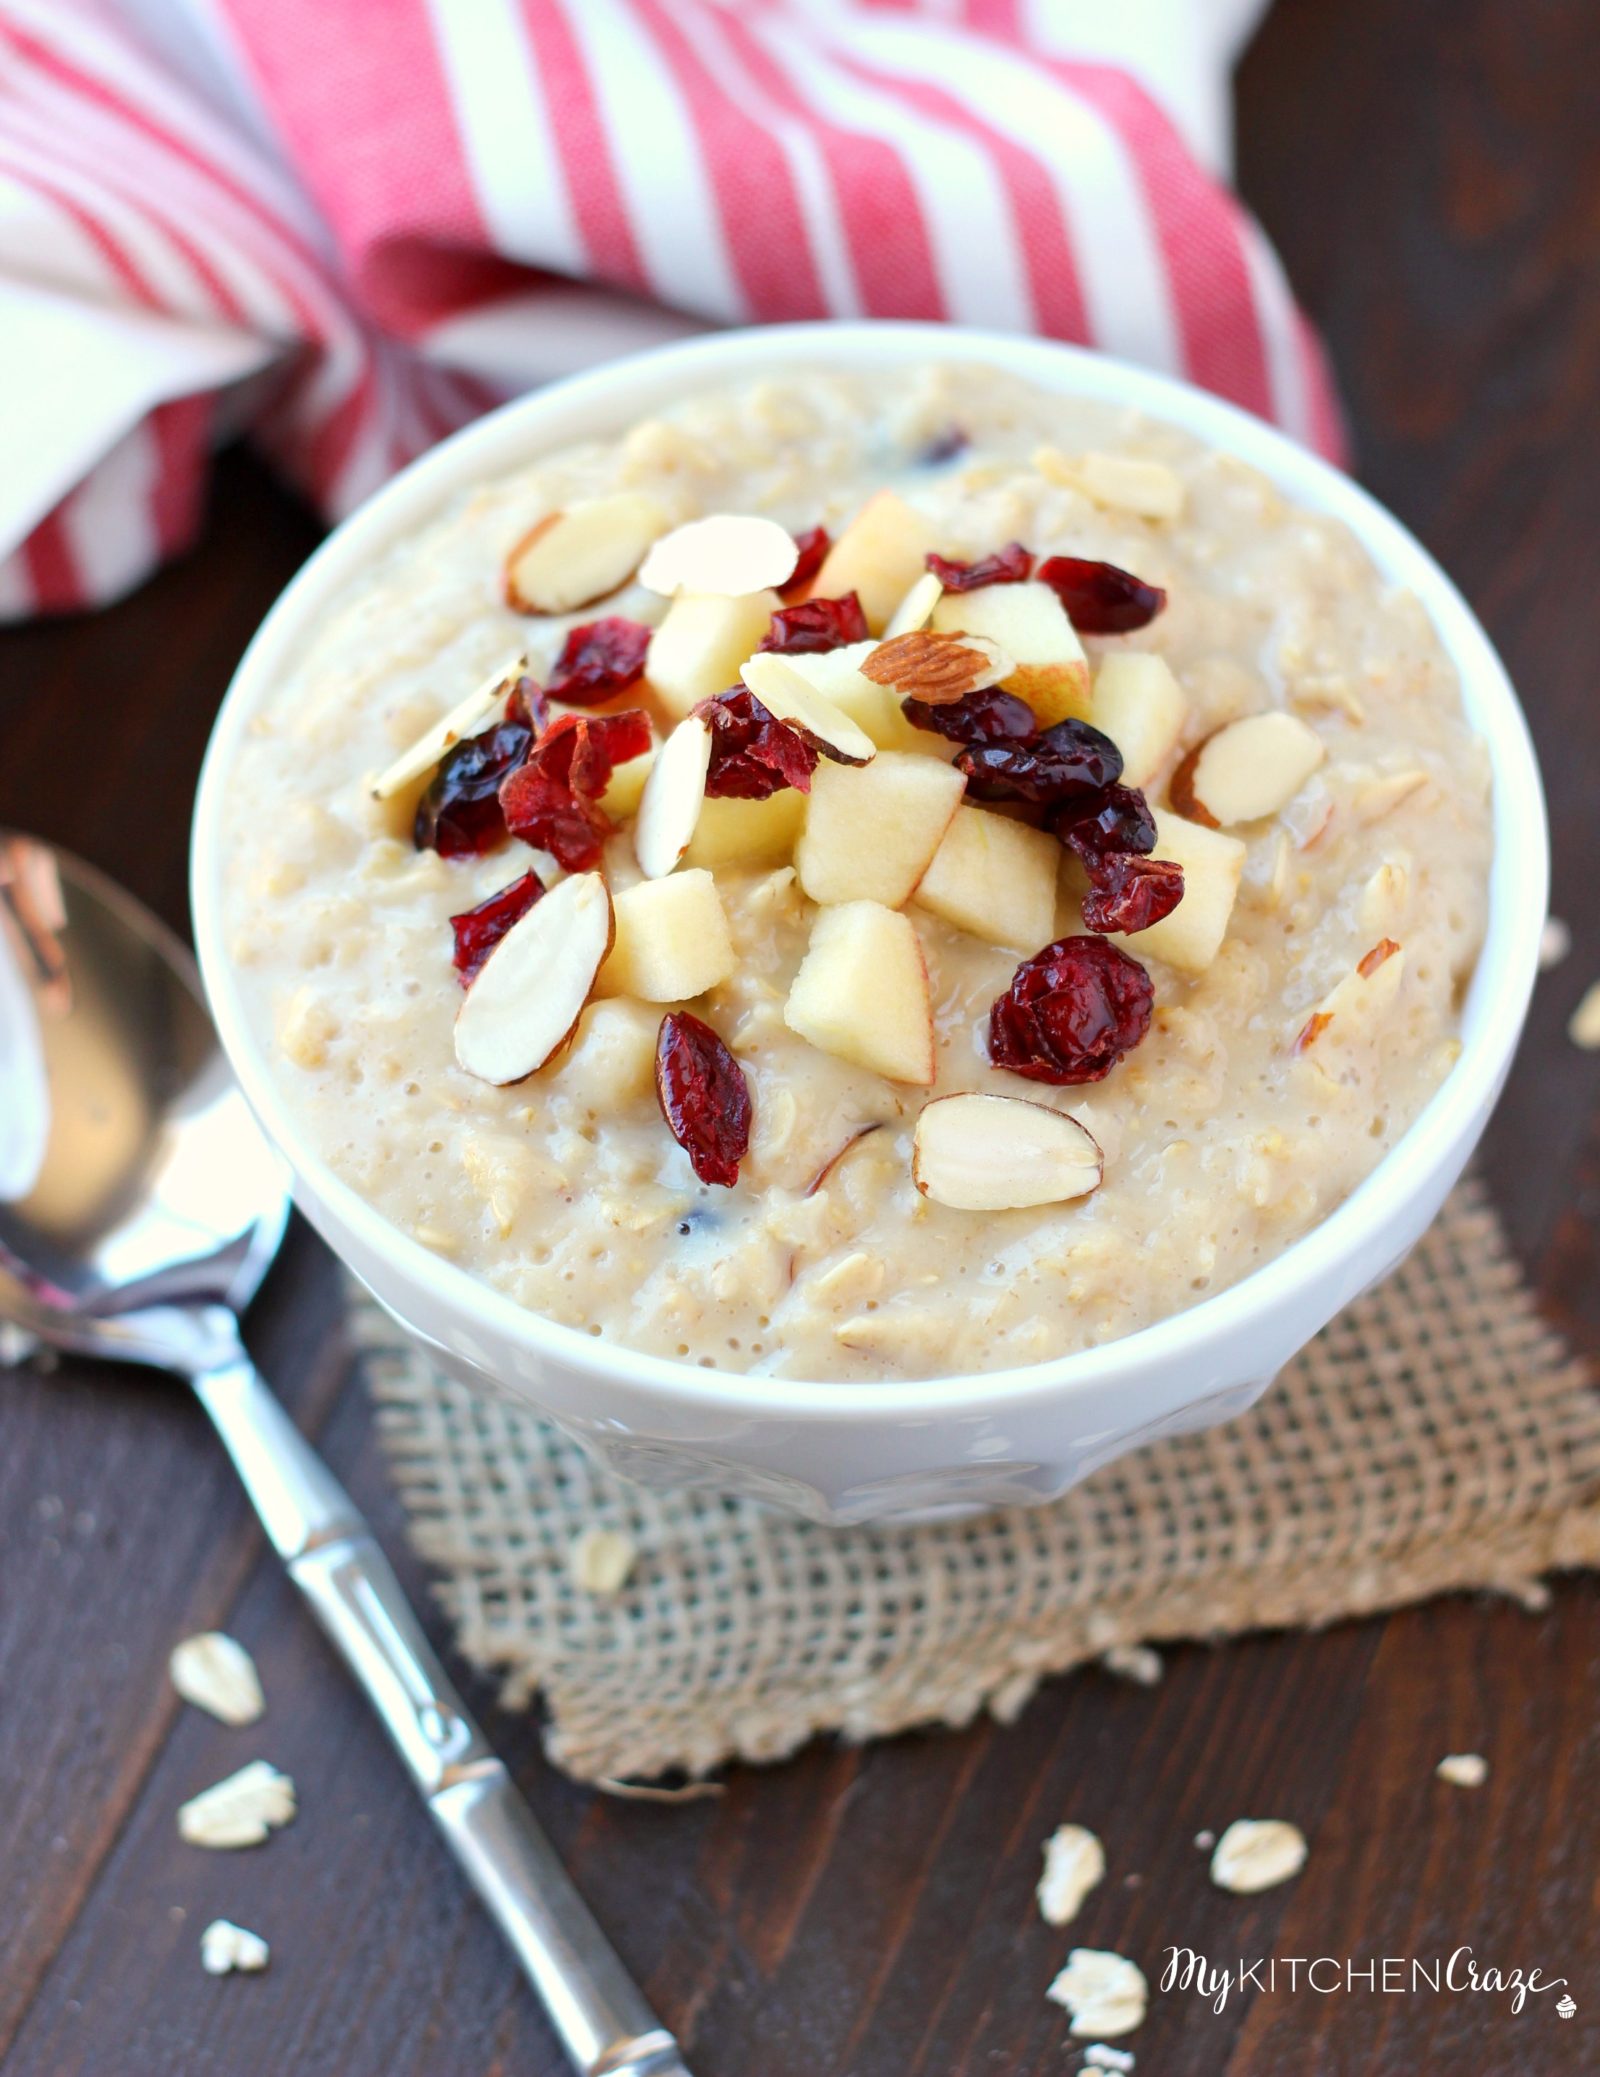 Cranberry Apple Oatmeal ~ mykitchencraze.com ~ Enjoy this creamy delicious oatmeal loaded with dried cranberries and apples. Breakfast never tasted so good.